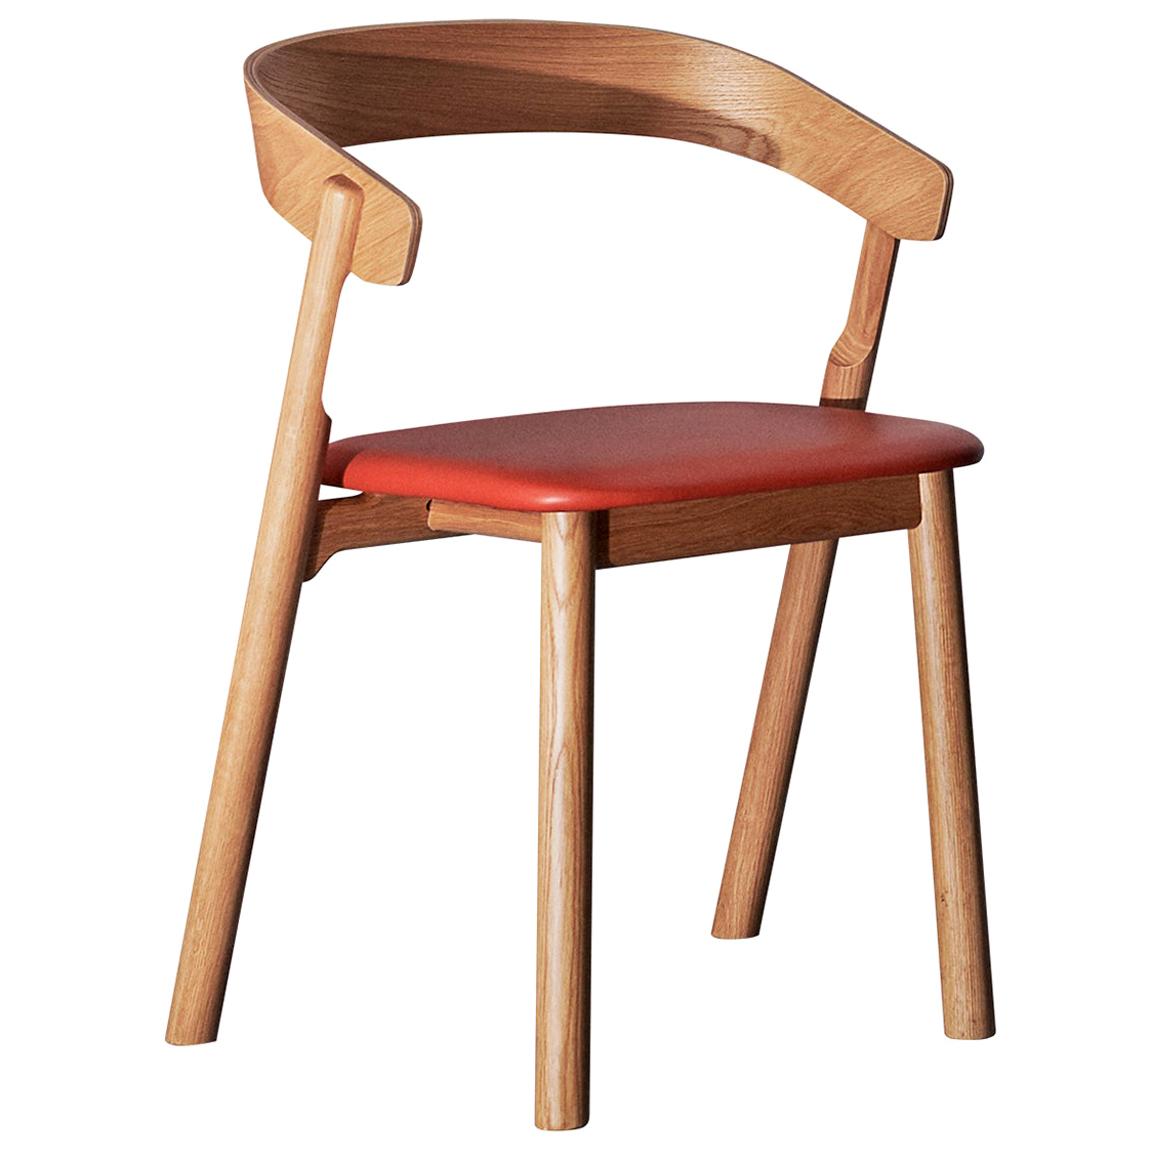 Nude, Nordic Design Dining Chair in Natural Oak